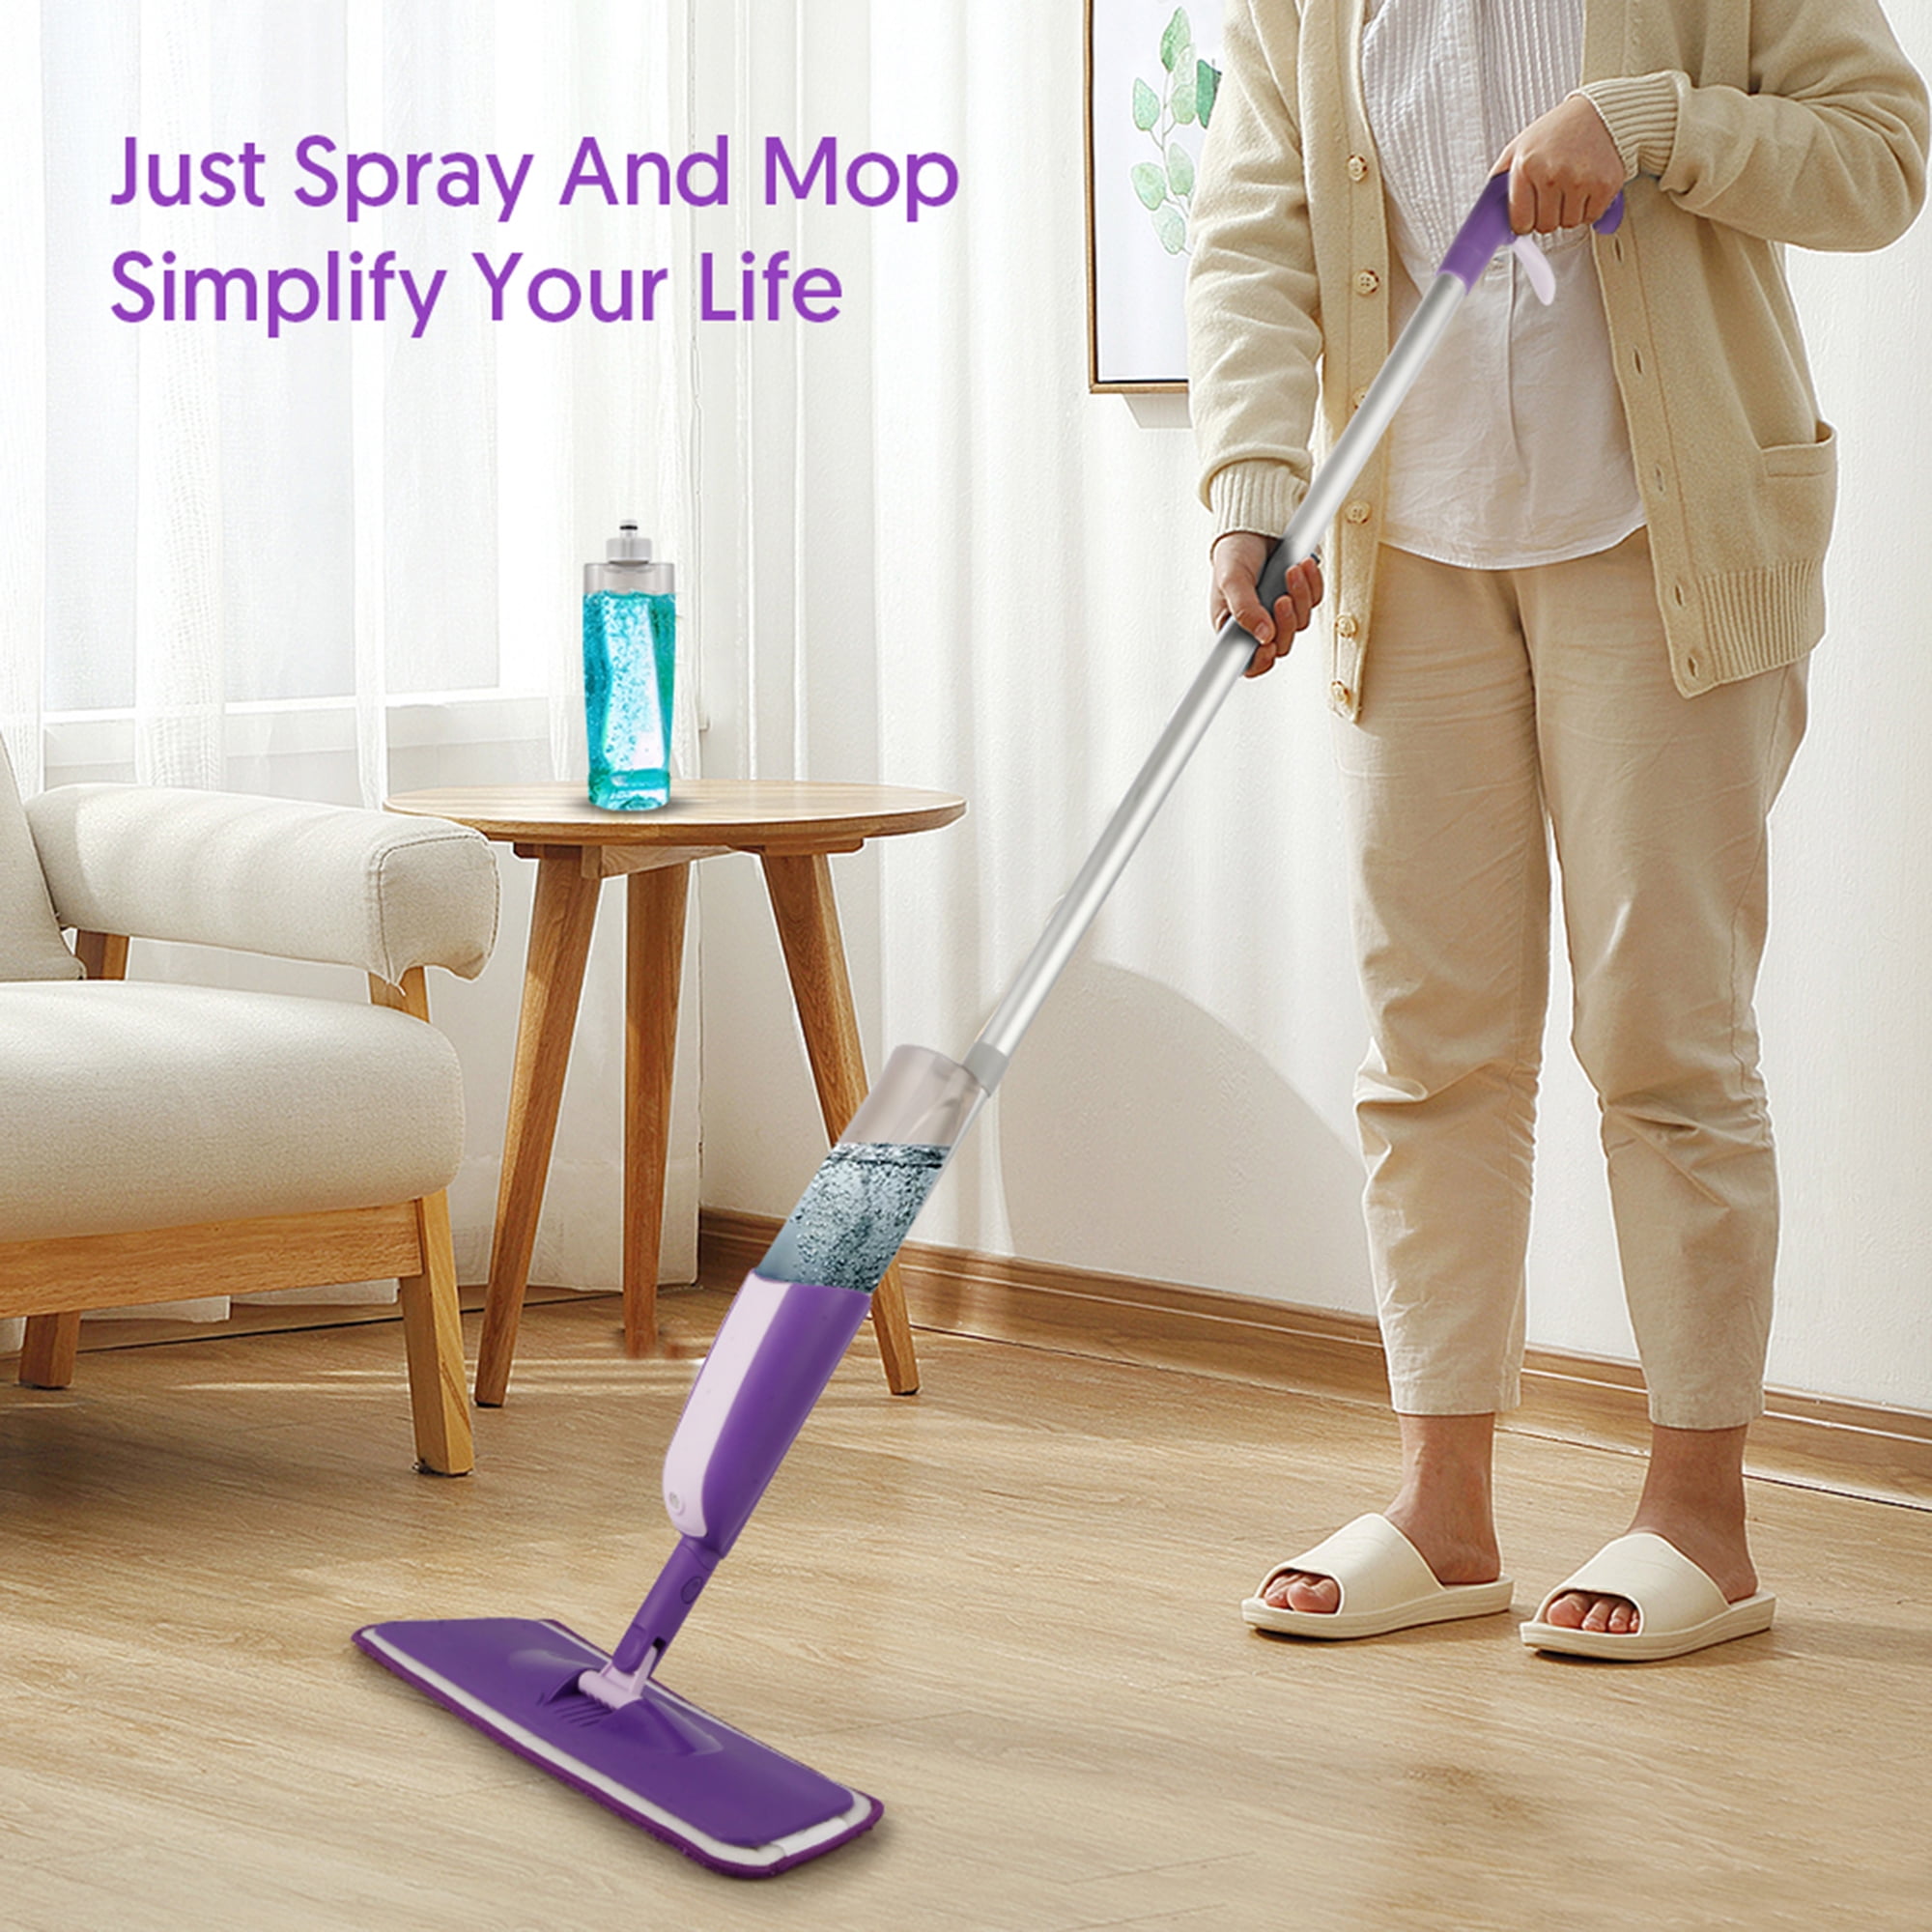 SUGARDAY Microfiber Spray Mop forCleaning Hardwood FloorWith two 410ml –  MEXERRIS